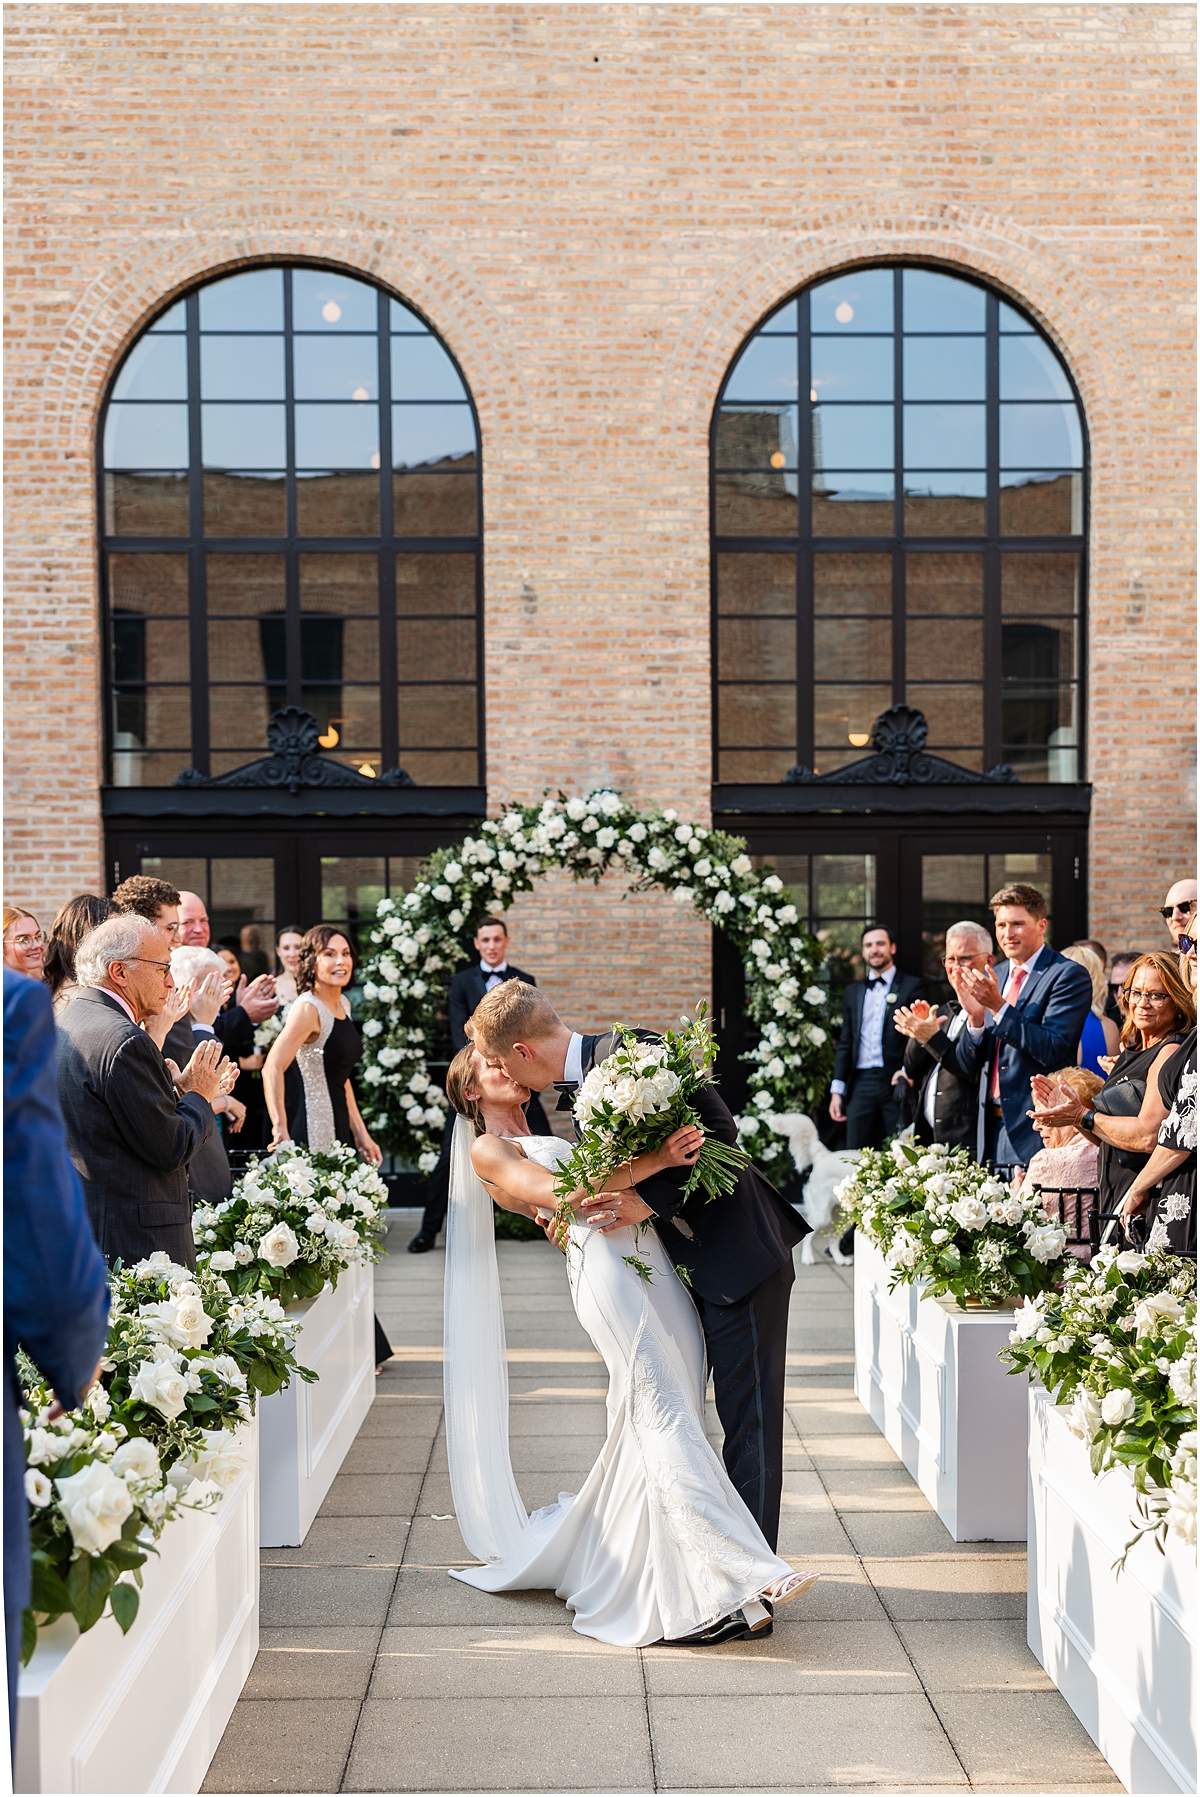 newlyweds kiss as they exit wedding ceremony